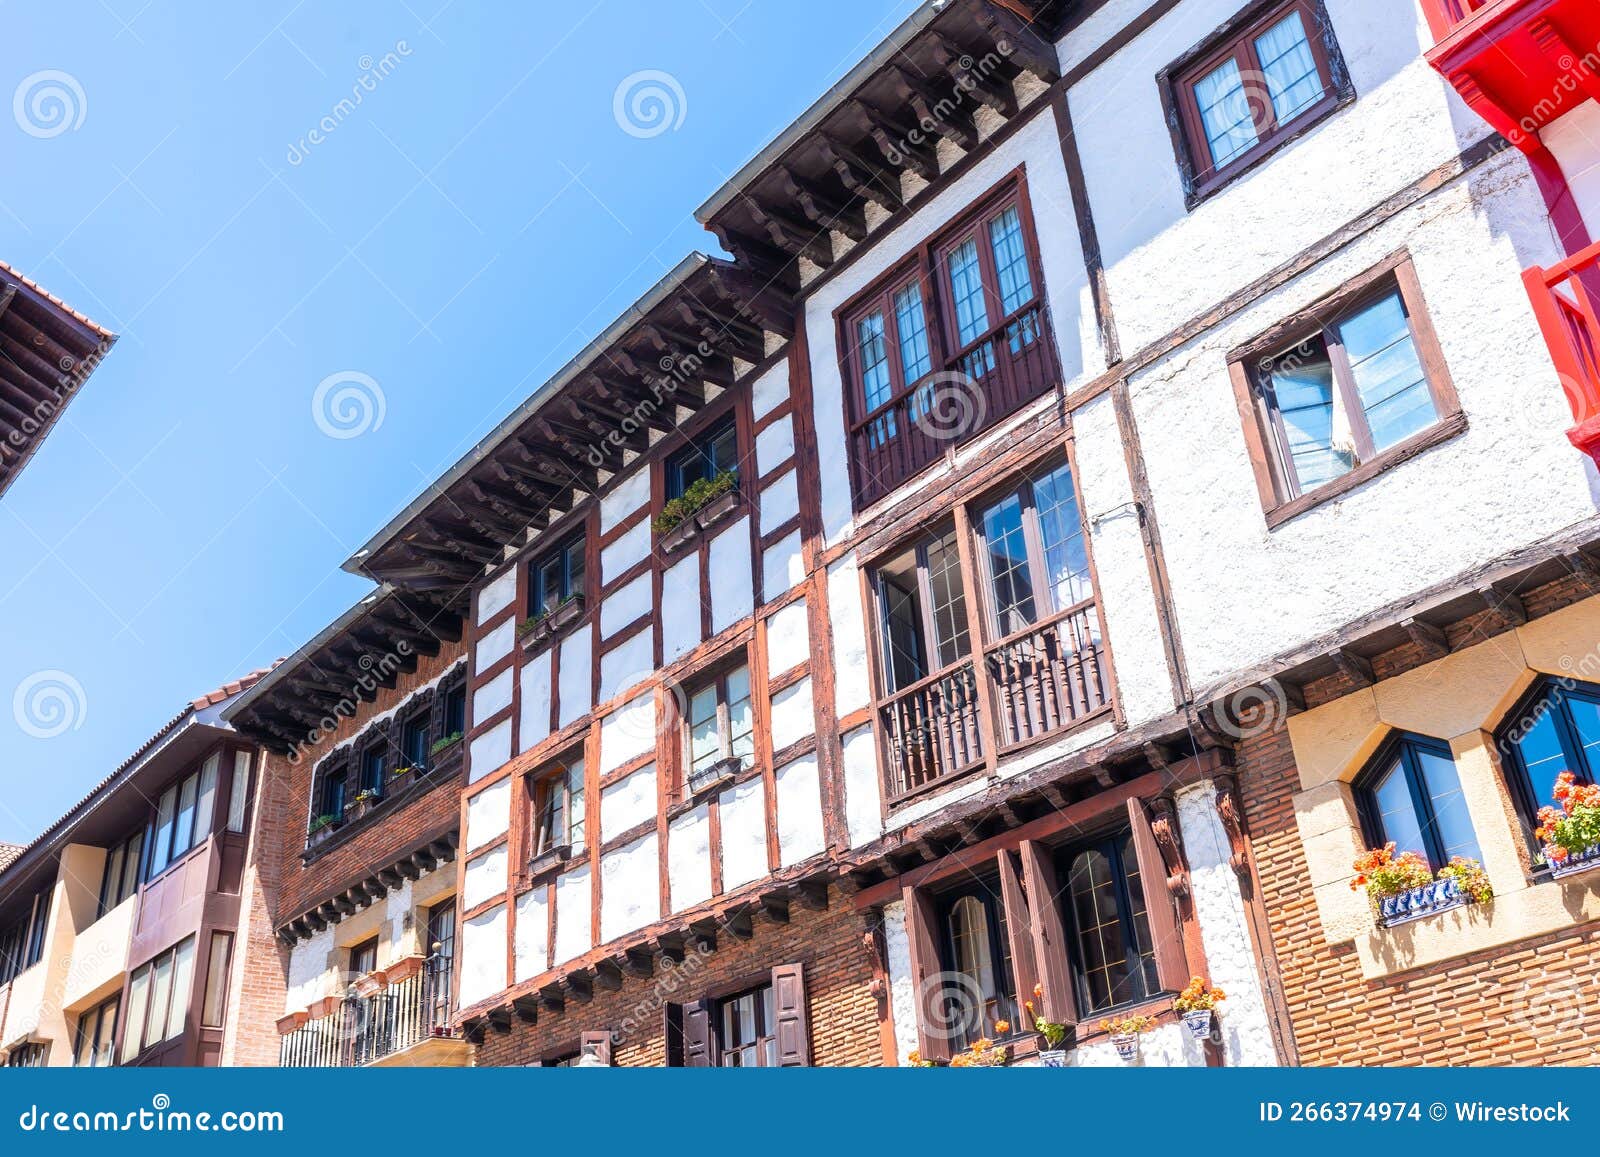 wooden houses of fuenterrabia or hondarribia in the old town, gipuzkoa